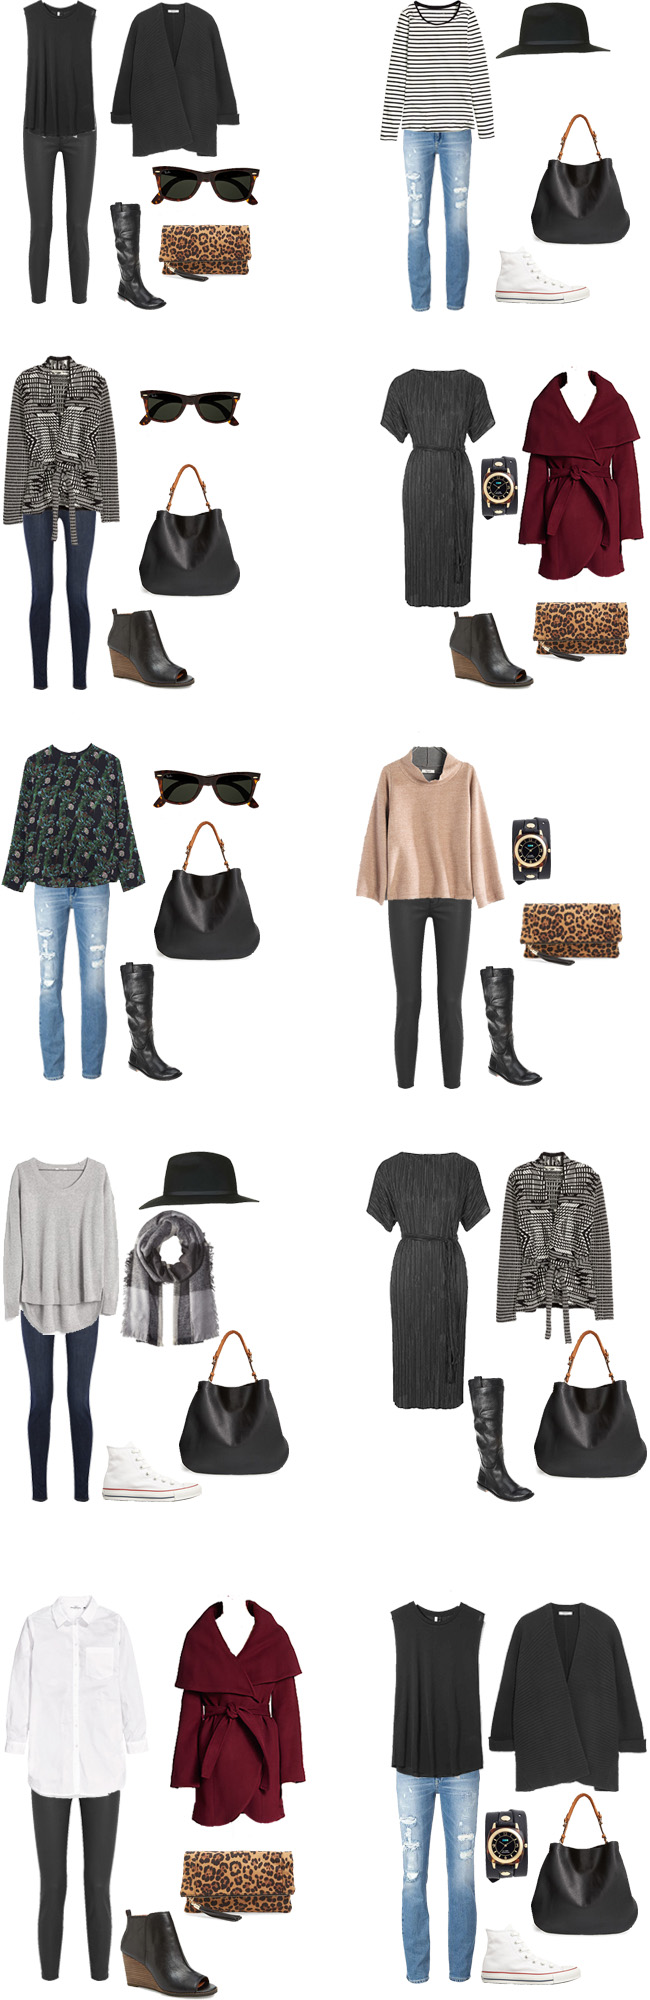 What to Wear in San Francisco Outfits 1-10 #travellight #packinglight #packinglist #traveltips